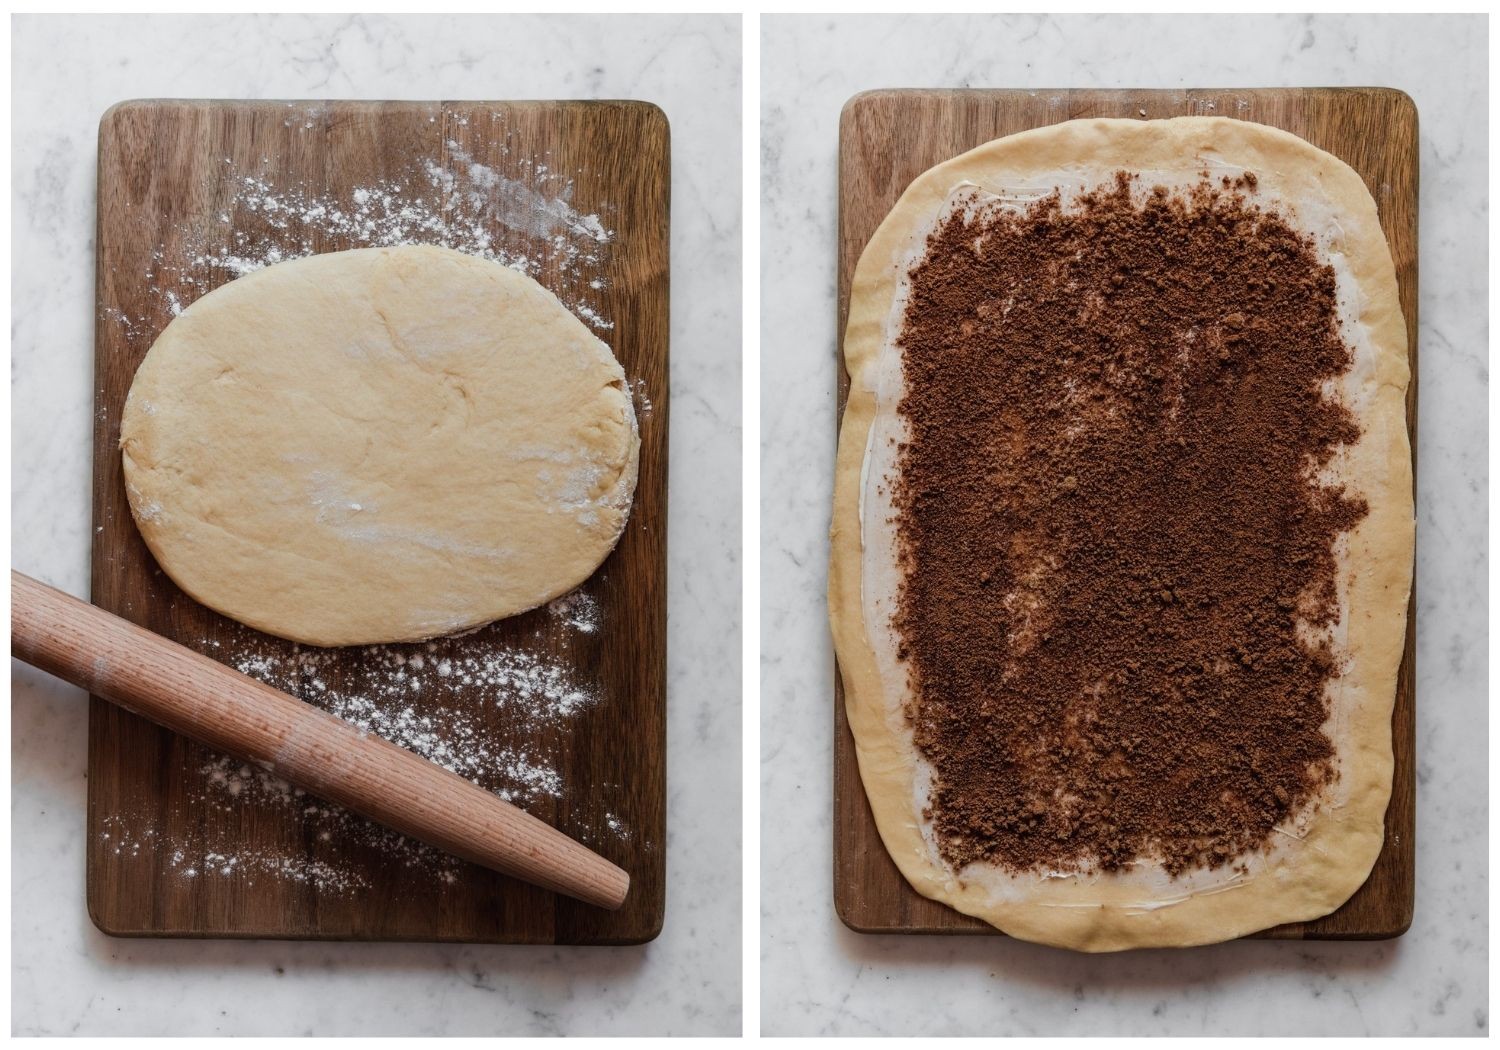 Two overhead images; on the left, a wood cutting board topped with a round of dough and a rolling pin. On the right, the dough is rolled out and sprinkled with cinnamon-sugar.